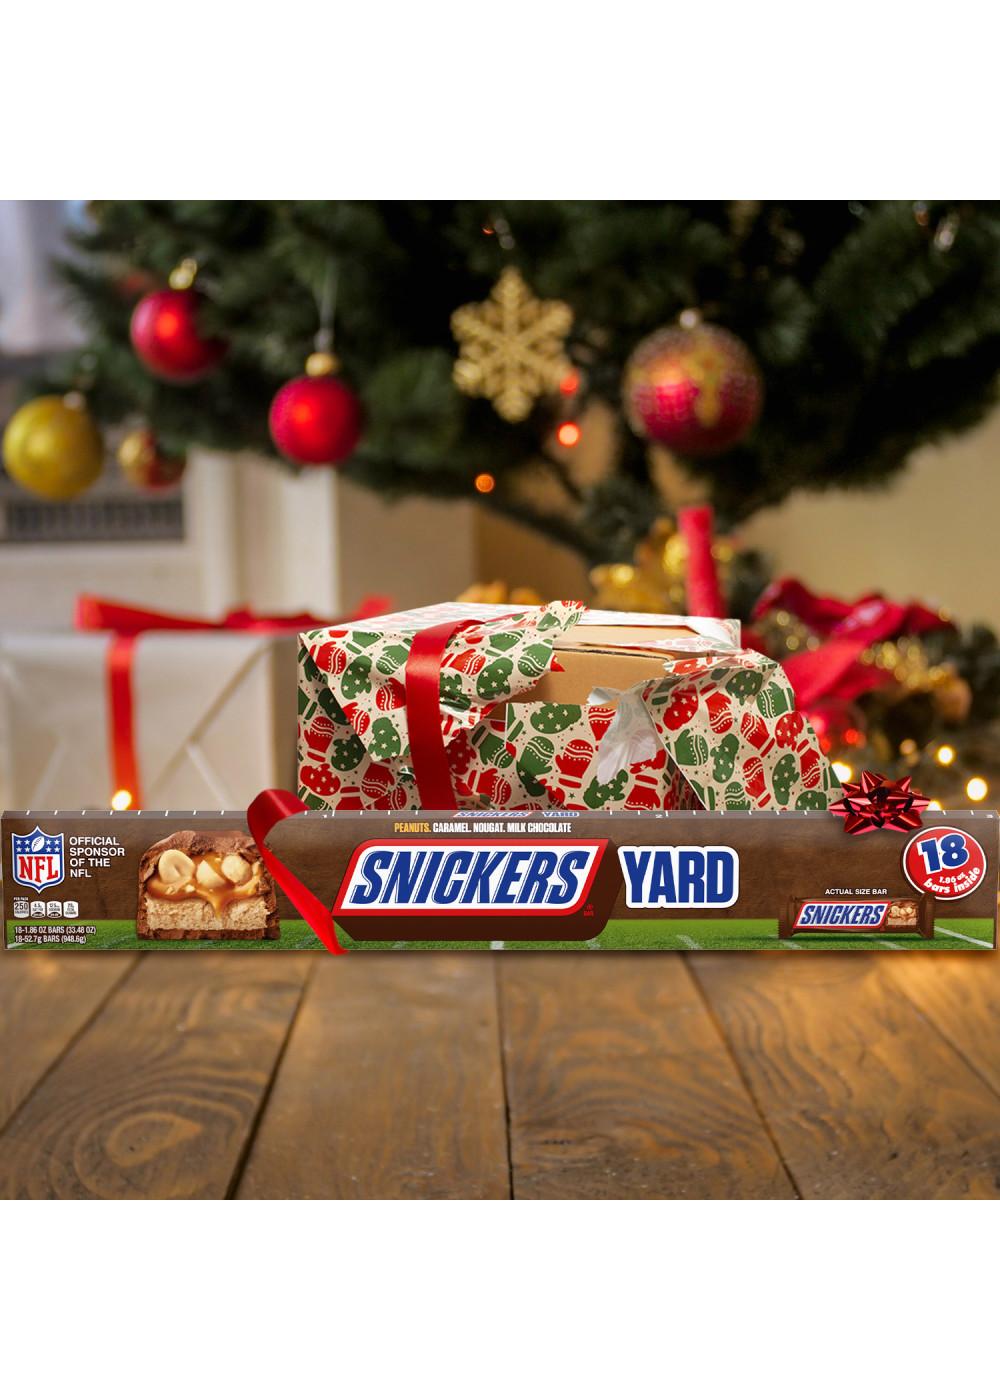 Snickers Yard Full Size Chocolate Candy Bars; image 7 of 7